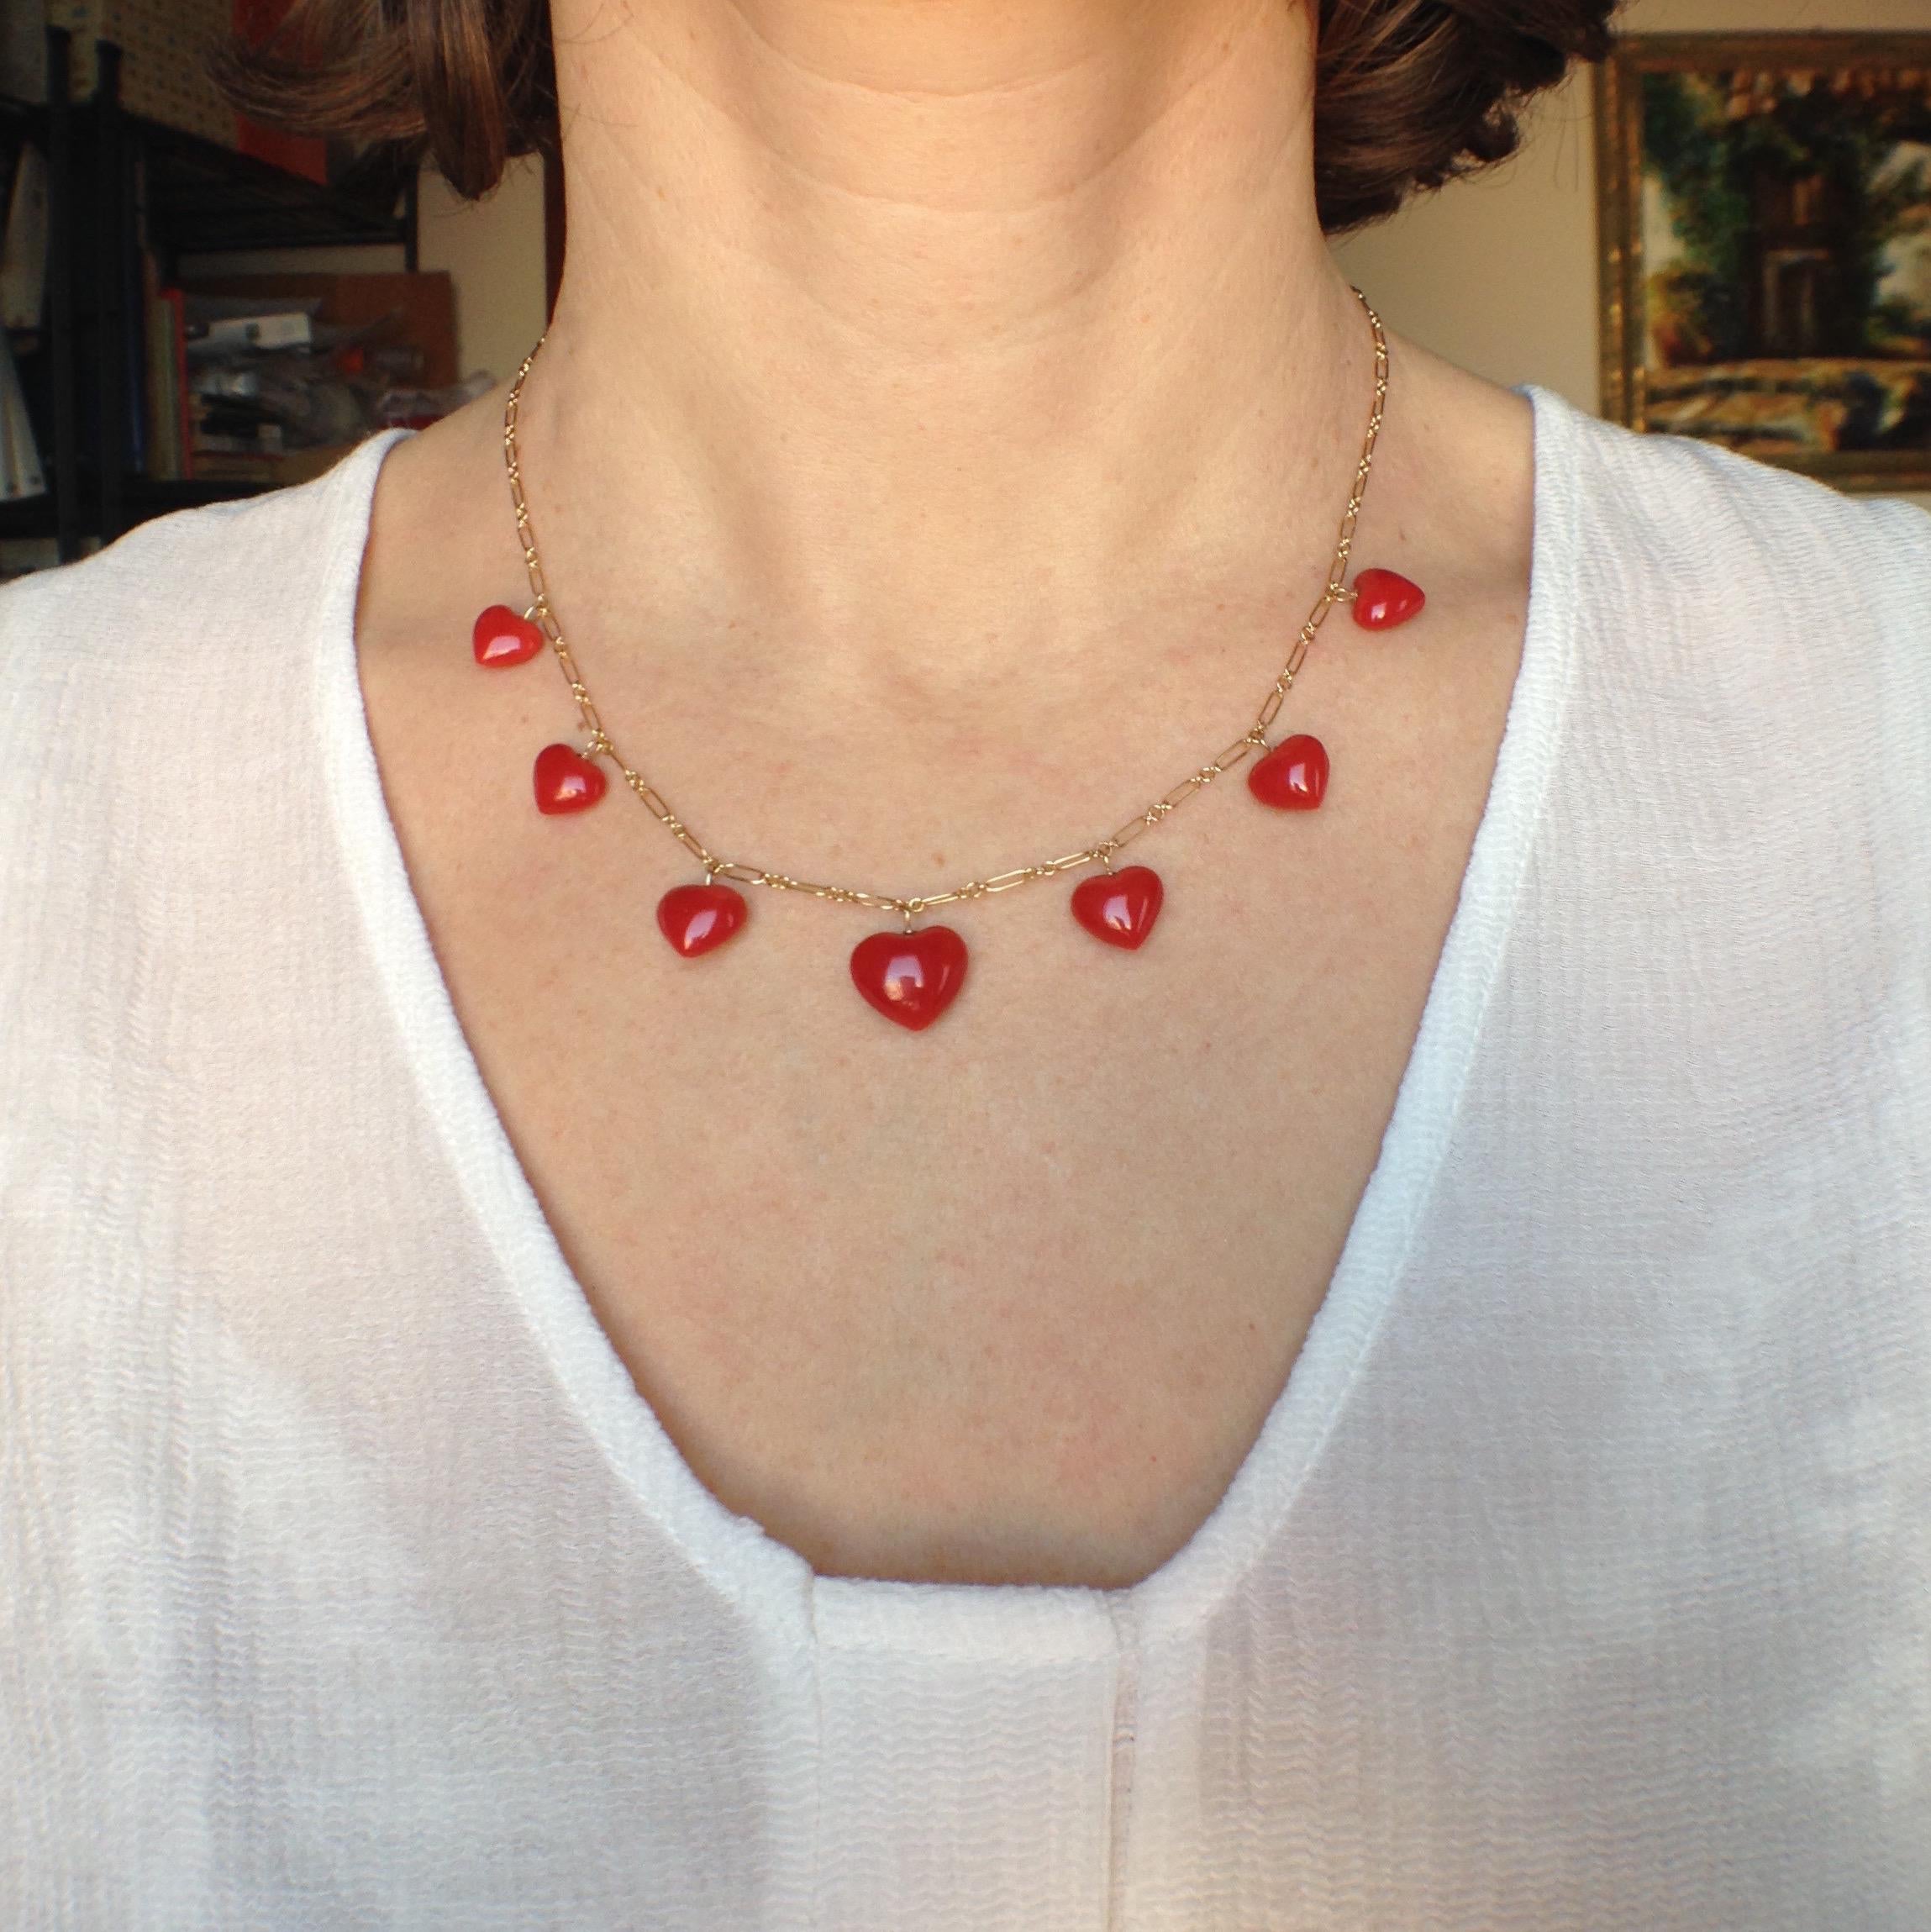 Petronilla Red Coral Heart Necklace Handmade in Italy 18 Karat Gold 1